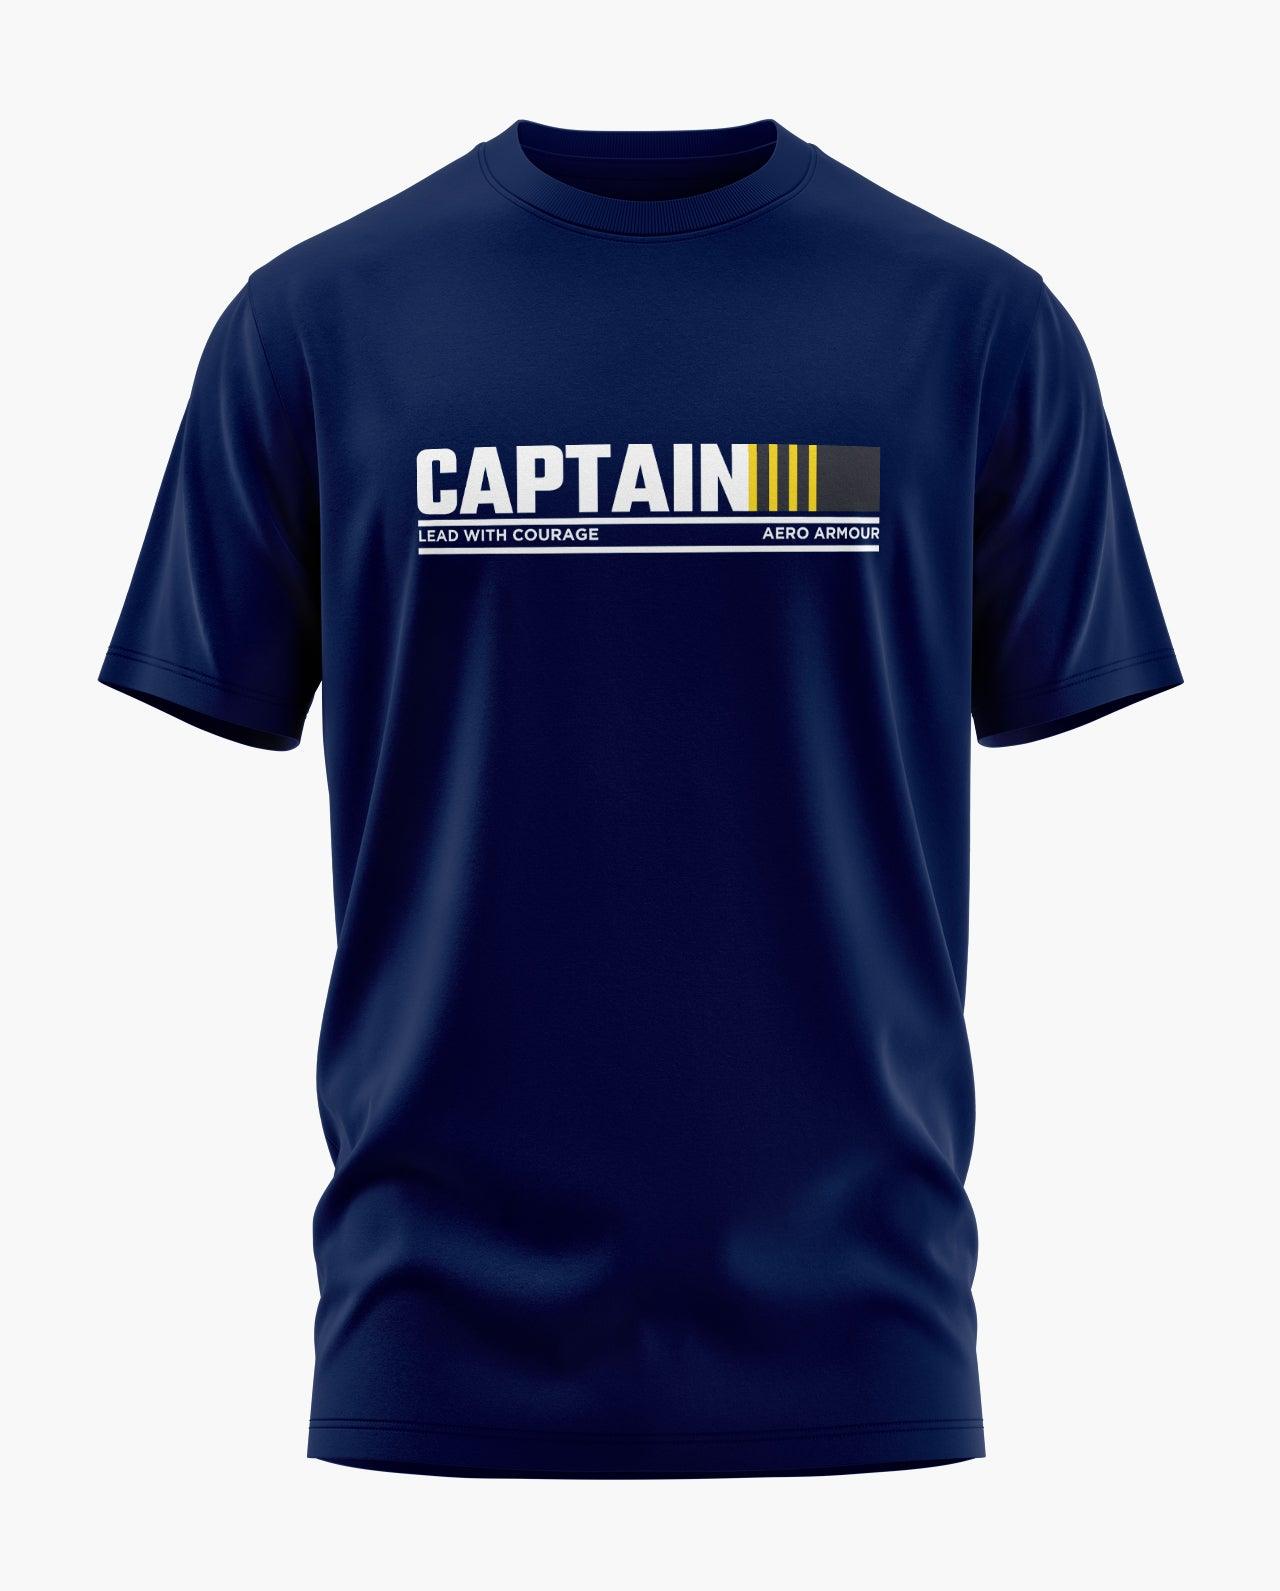 Captain Lead With Courage T-Shirt - Aero Armour